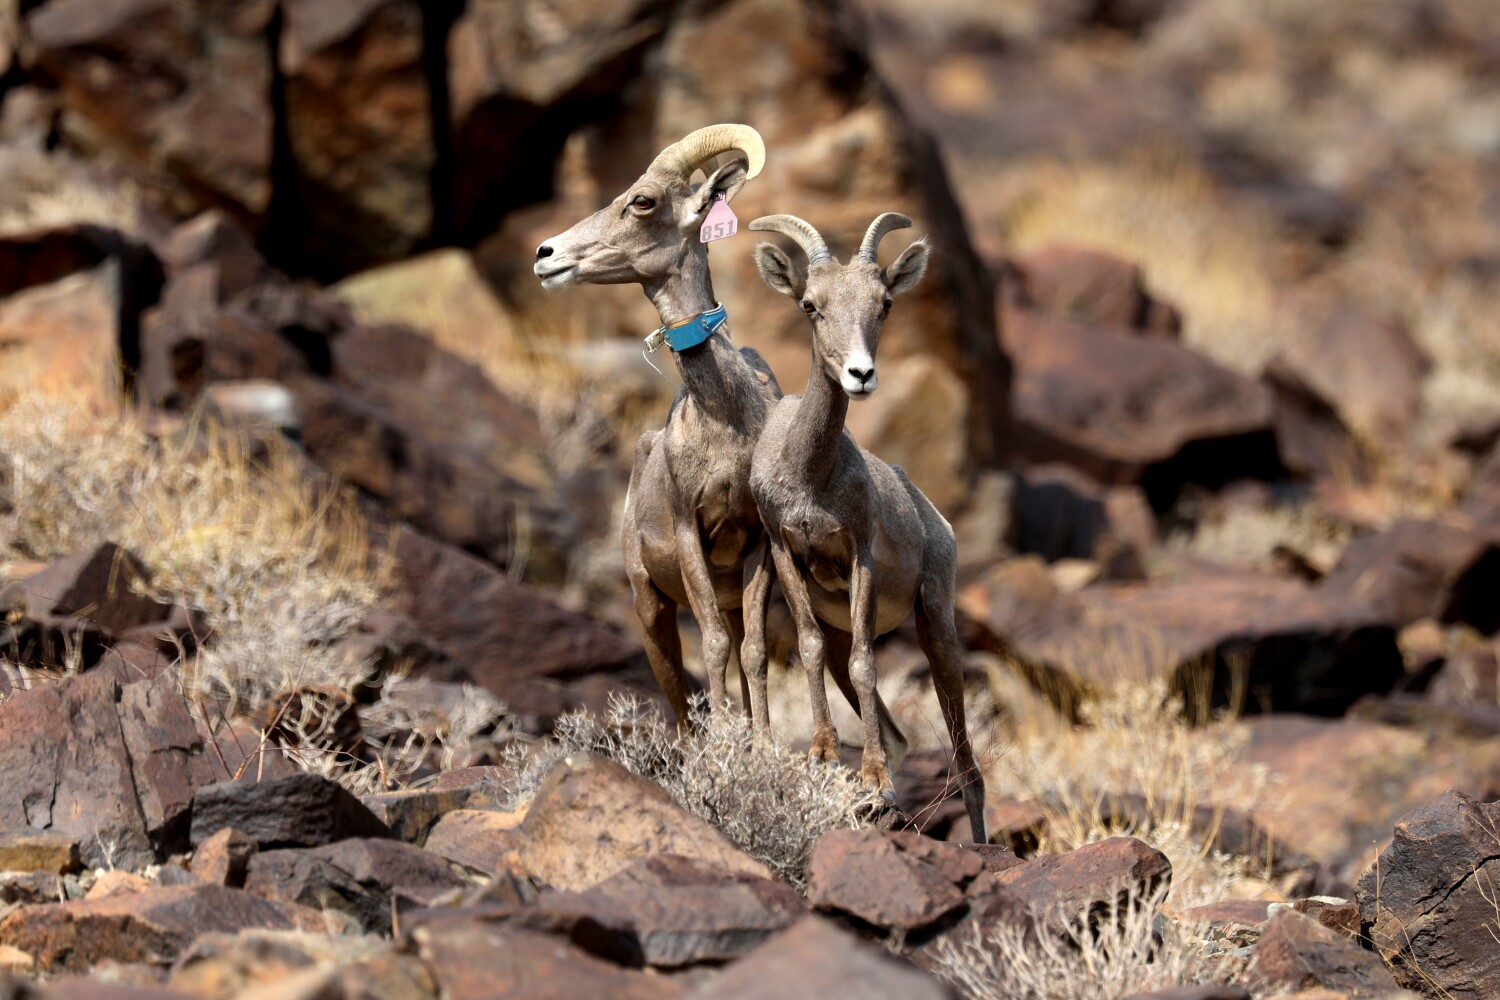 High-speed train to Las Vegas is hailed as an eco jackpot. But will it harm desert sheep?